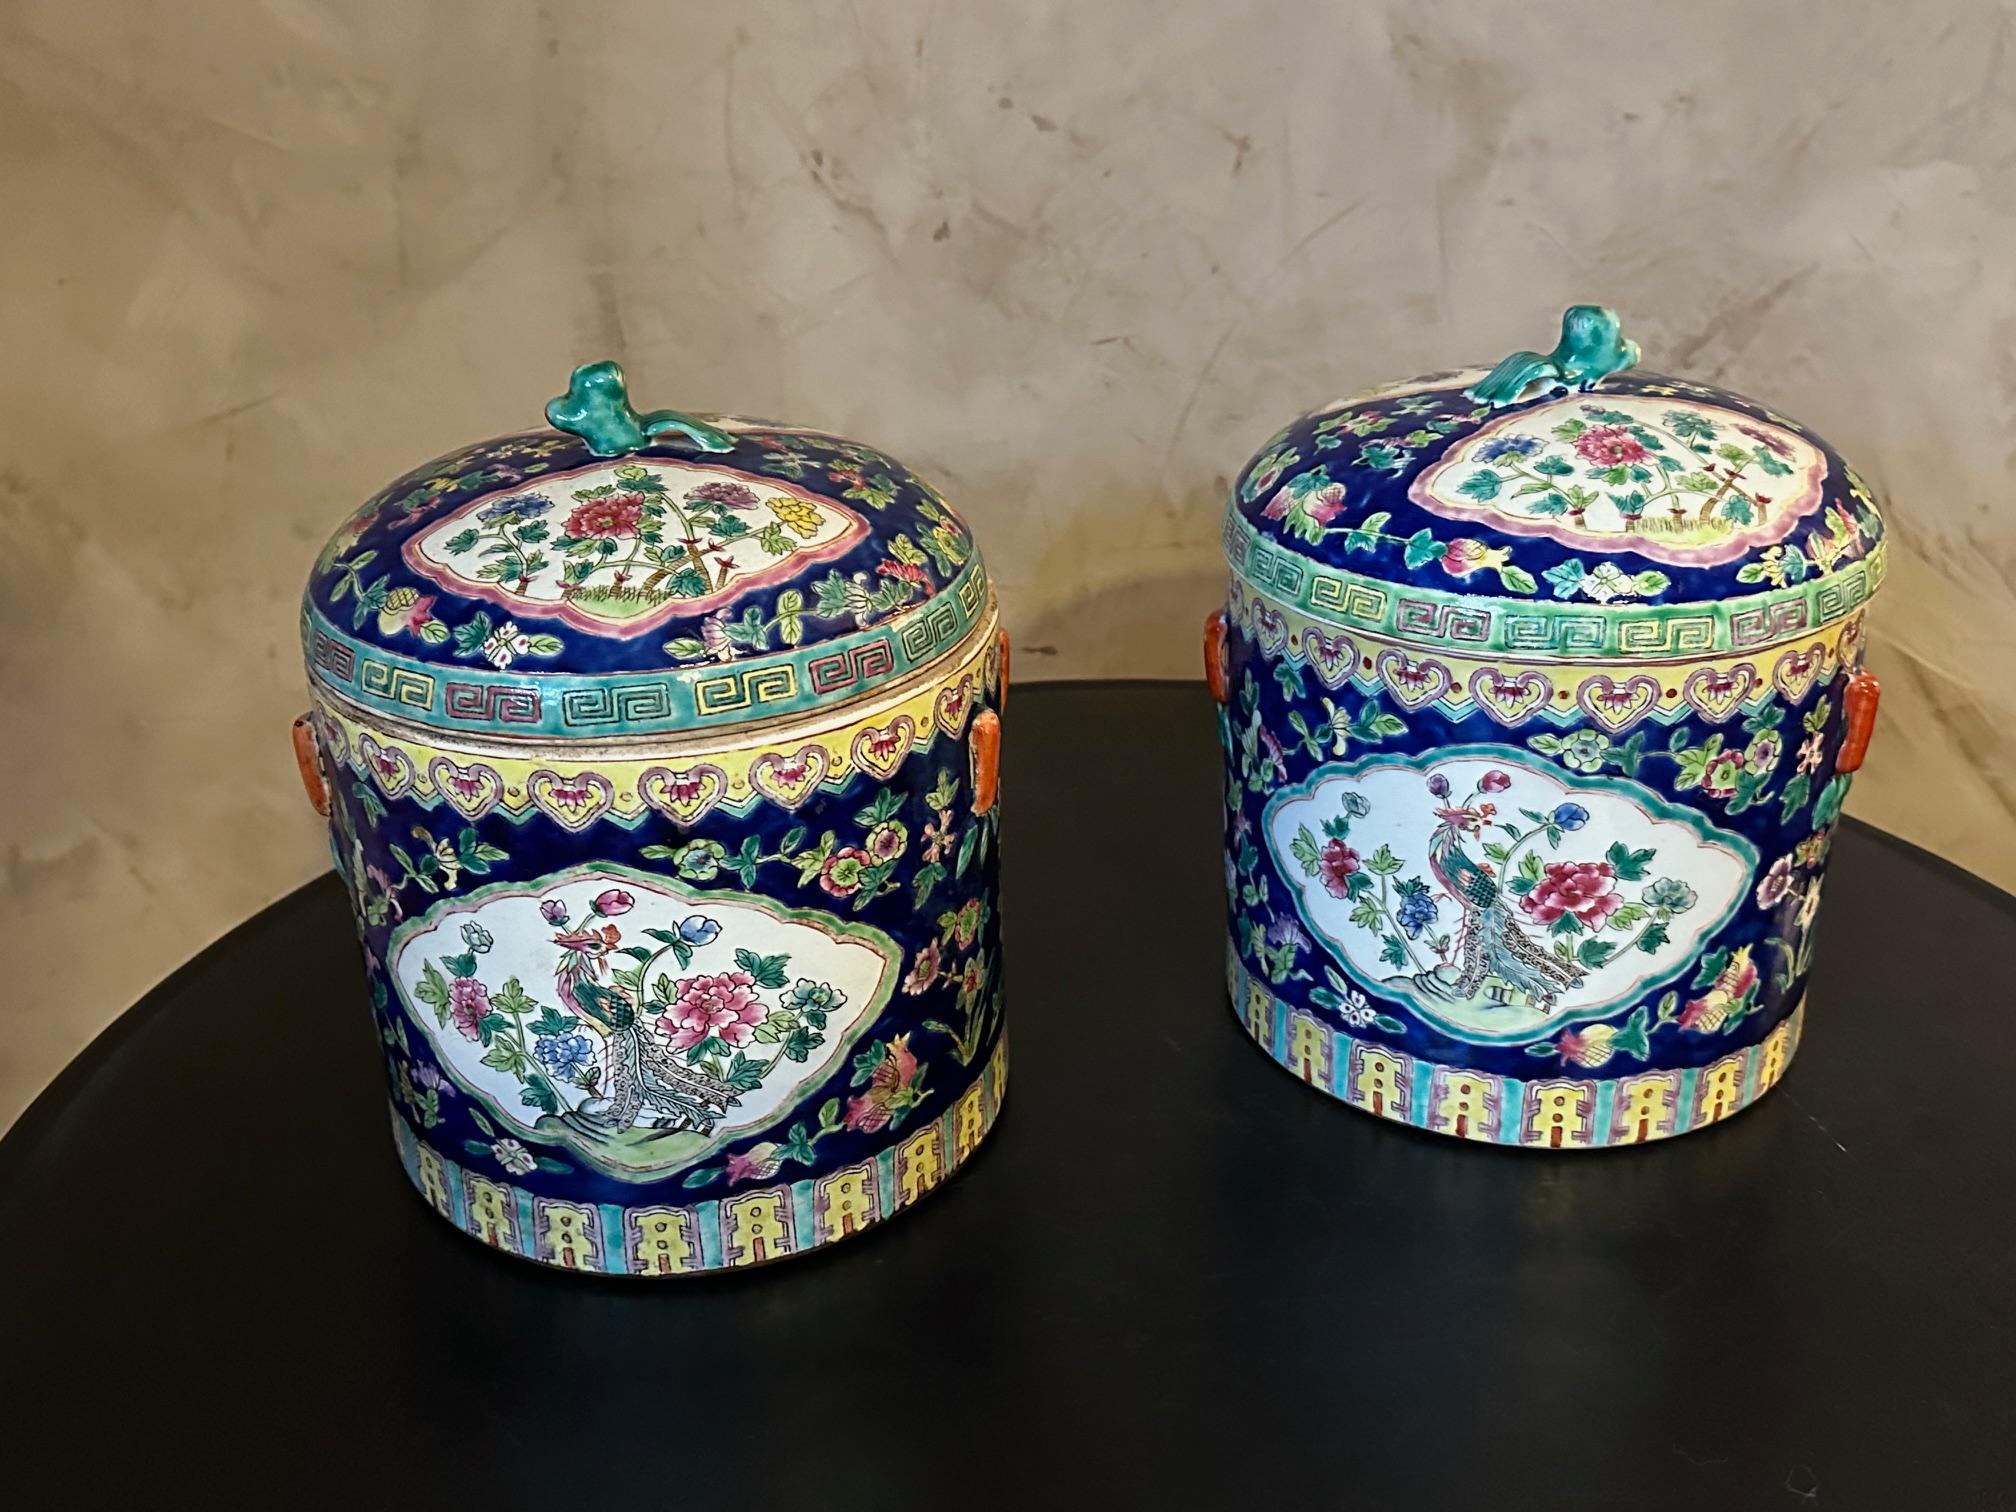 Pair of Chinese Ginger jars dating from the end of the 19th century.
Lids with phô dogs as handles. Decorated with colorful birds and flowers.
Very elegant and delicate.
Red stamp below.
Superb quality and very good condition.
​